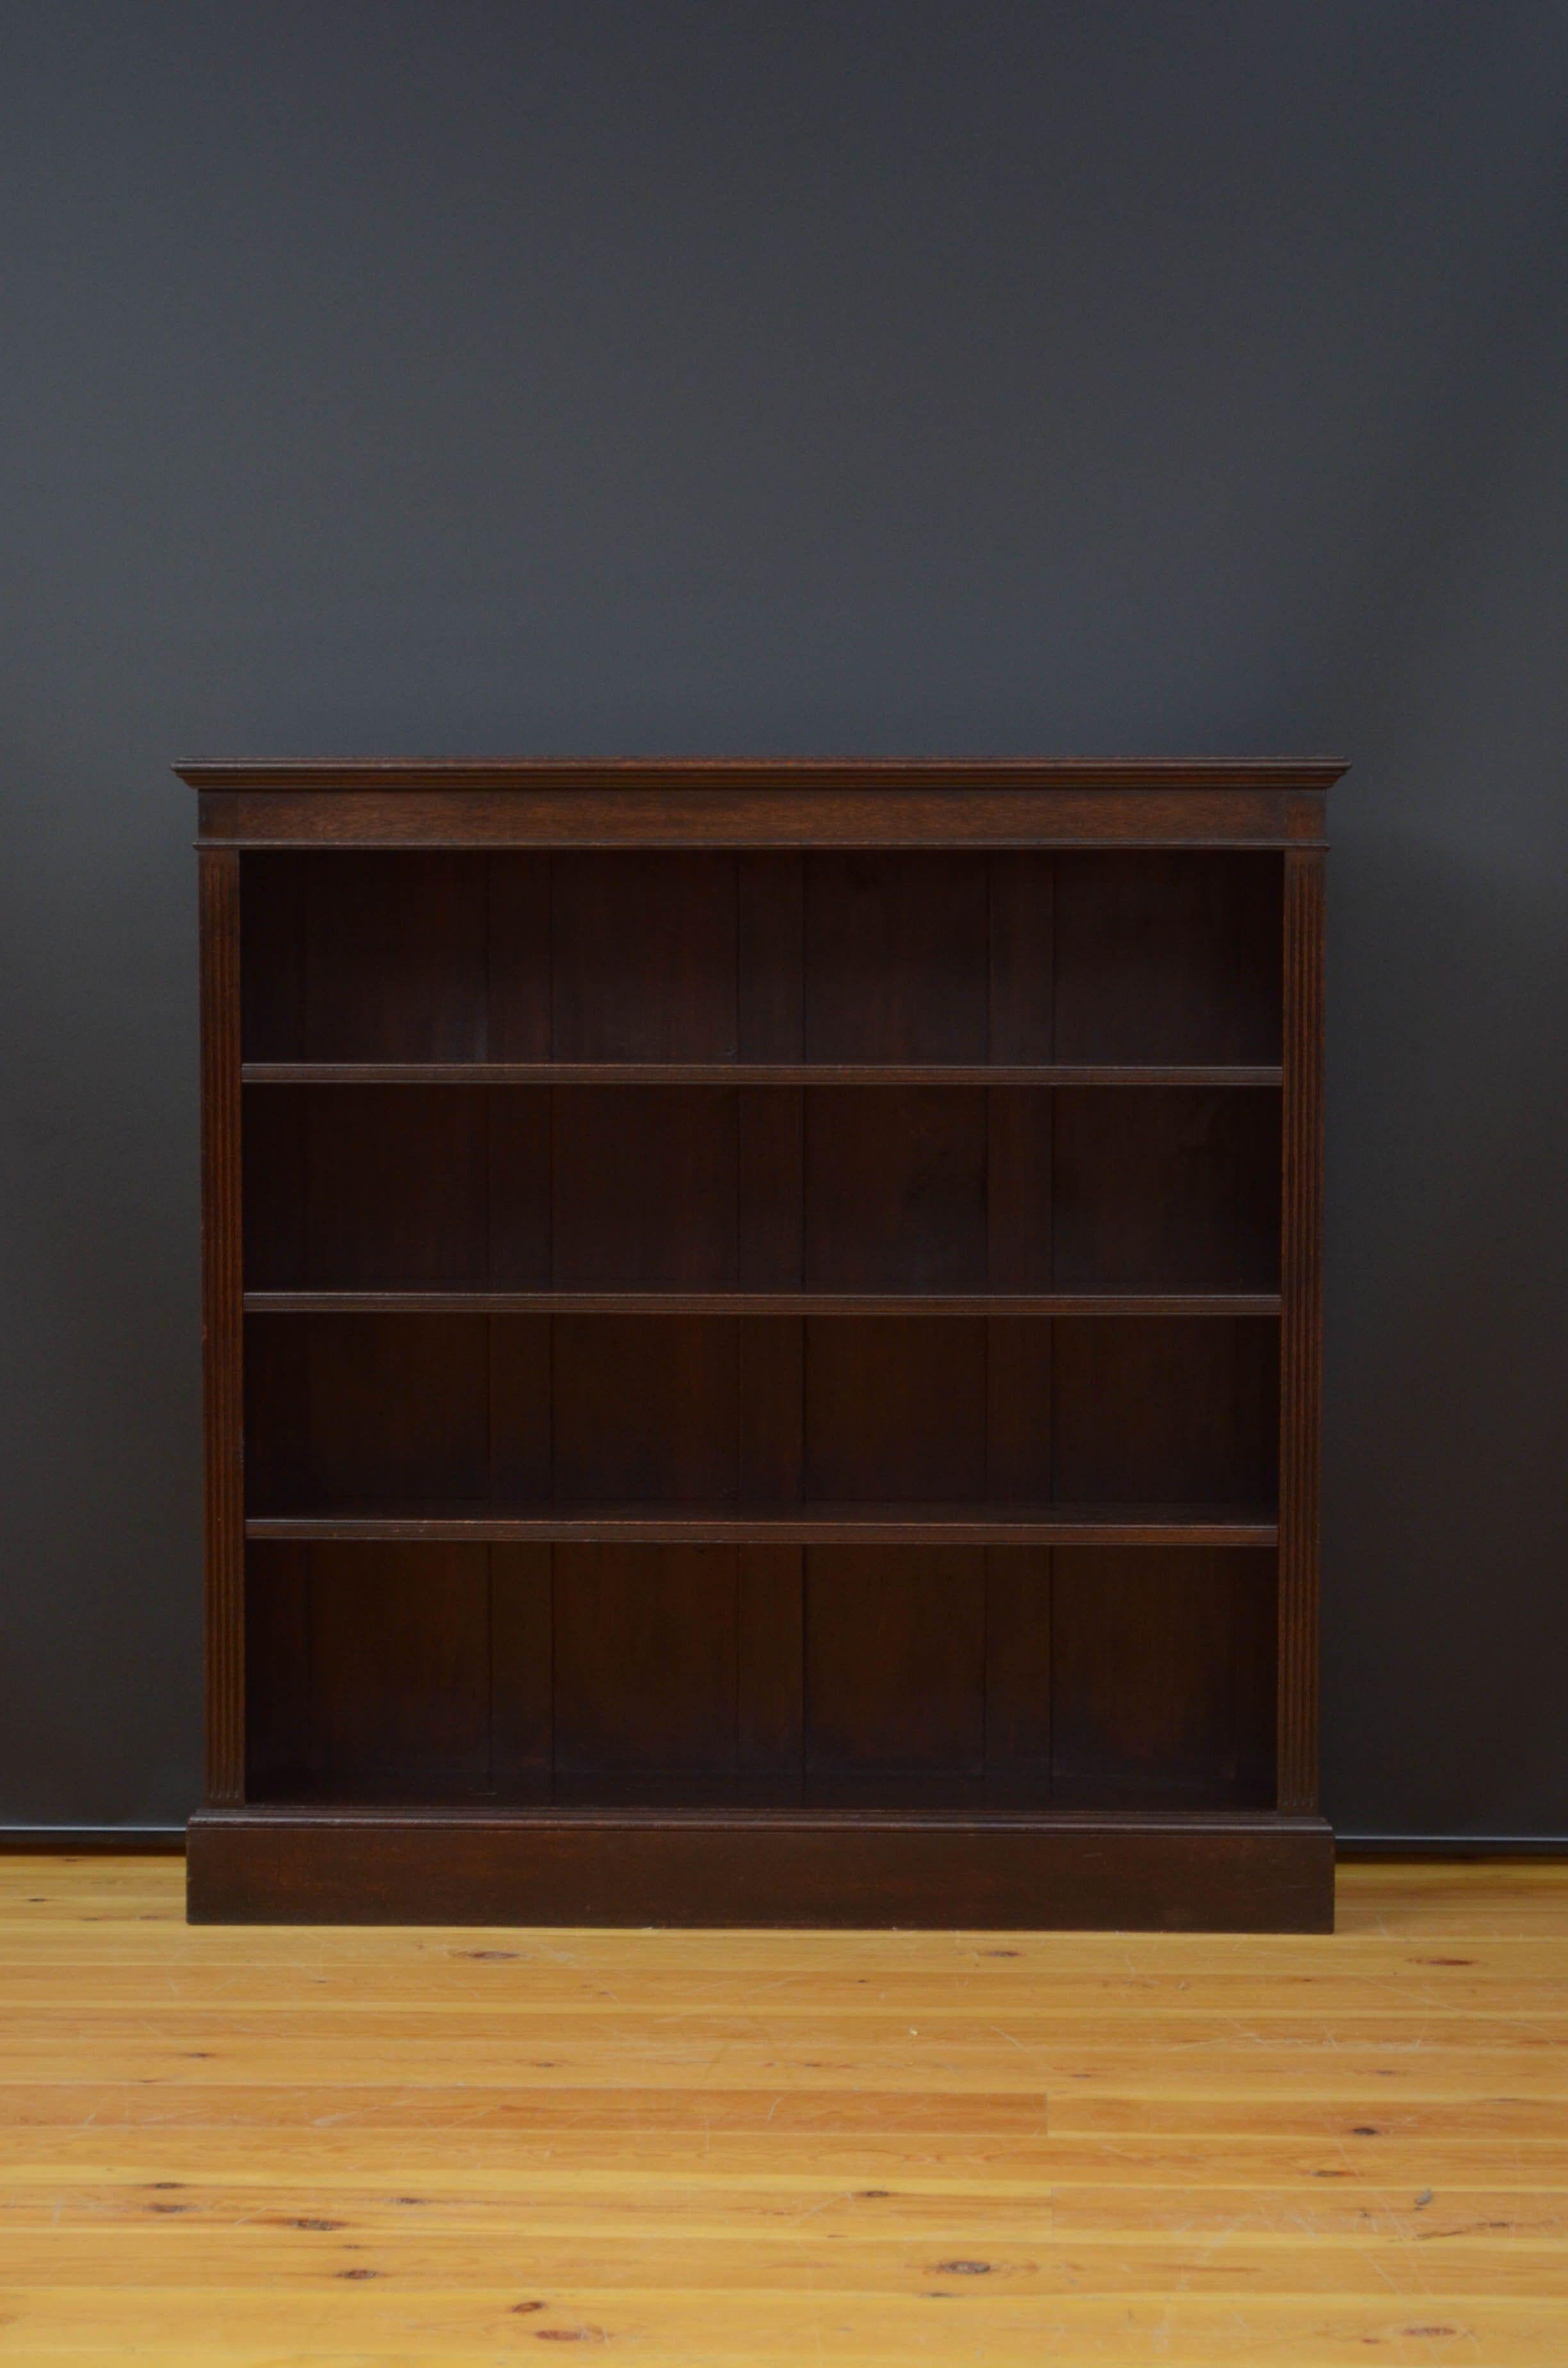 Sn5225 Edwardian open bookcase in oak with moulded top, shallow frieze and three height adjustable shelves flanked by reeded pilasters, standing on moulded plinth base. This antique bookcase retains its original dark finish and patina, all in home